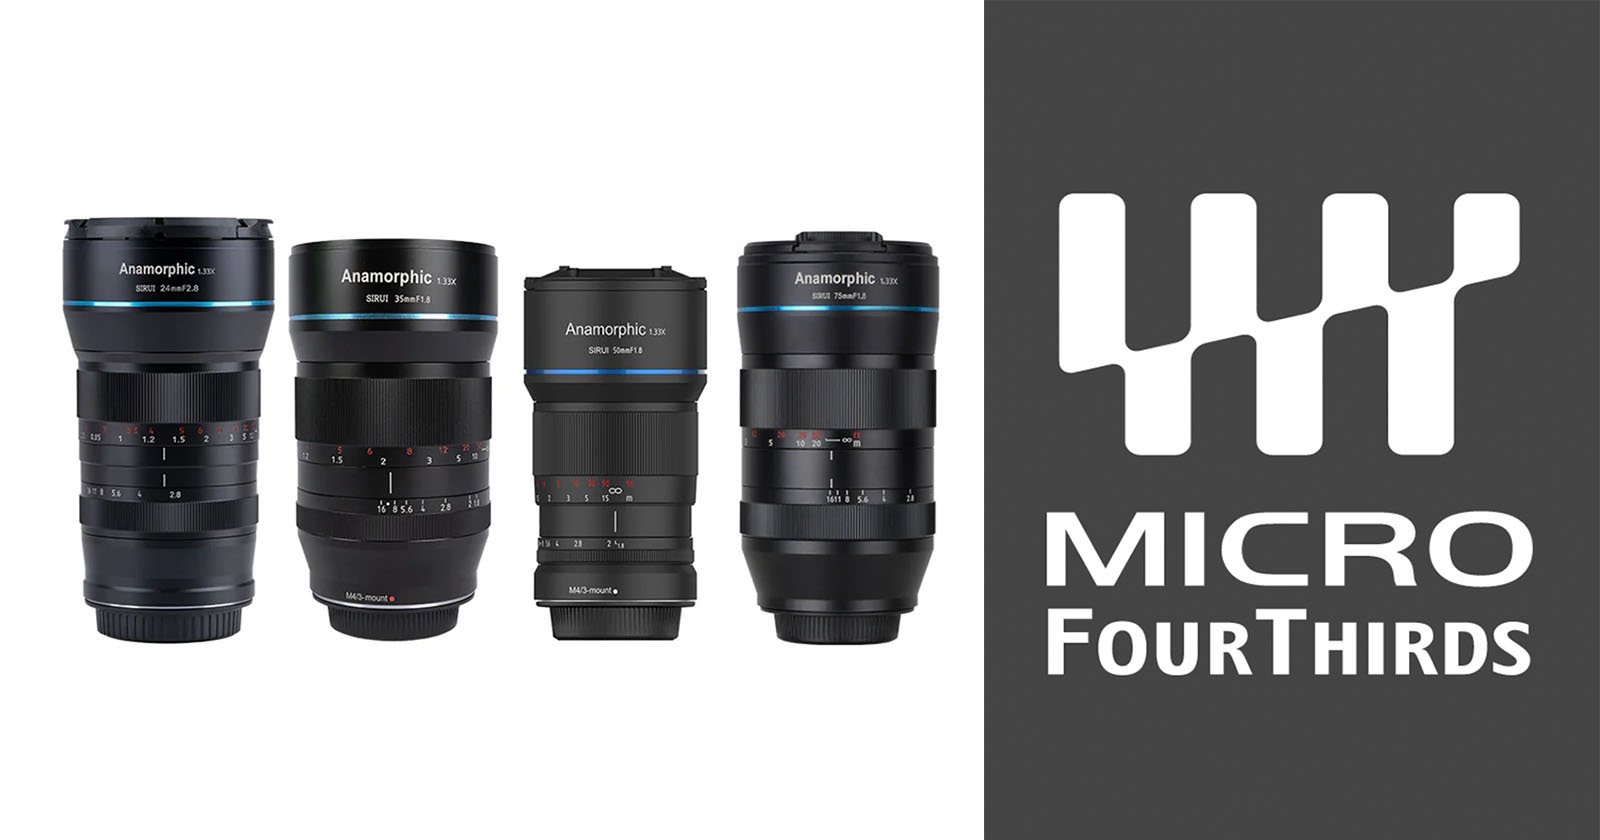 A group of four camera lenses is displayed on the left side of the image, labeled as Anamorphic and part of the Micro Four Thirds system. The right side of the image features the Micro Four Thirds logo and text on a gray background.